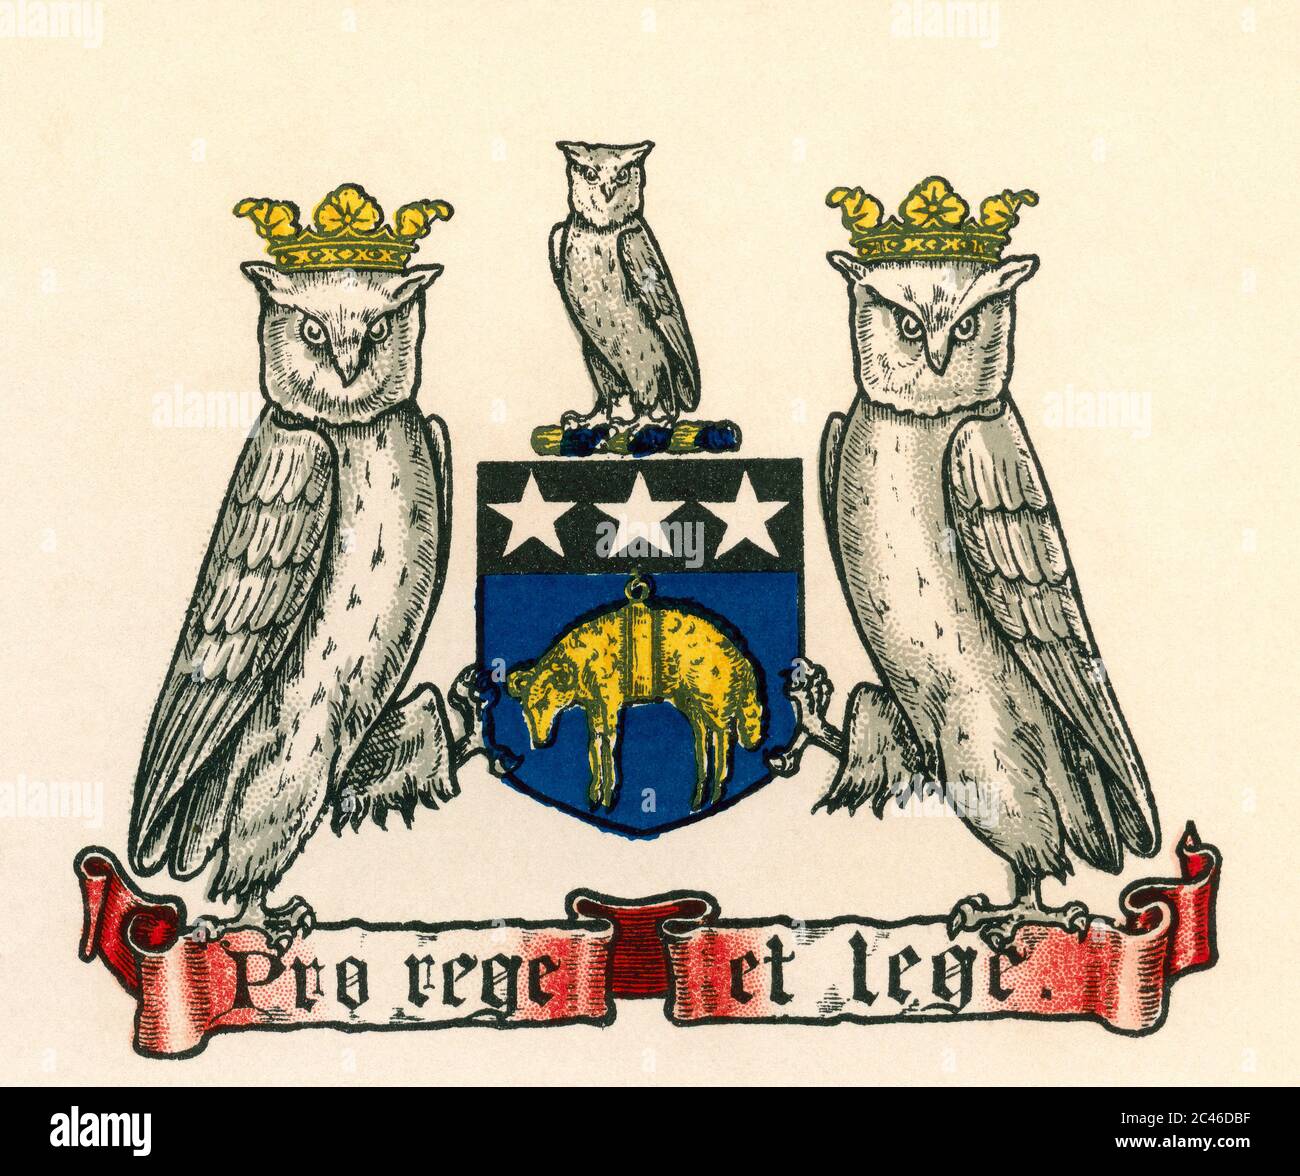 Coat of arms of Leeds, England. These arms were used prior to 1921.  From The Business Encyclopaedia and Legal Adviser, published 1907. Stock Photo